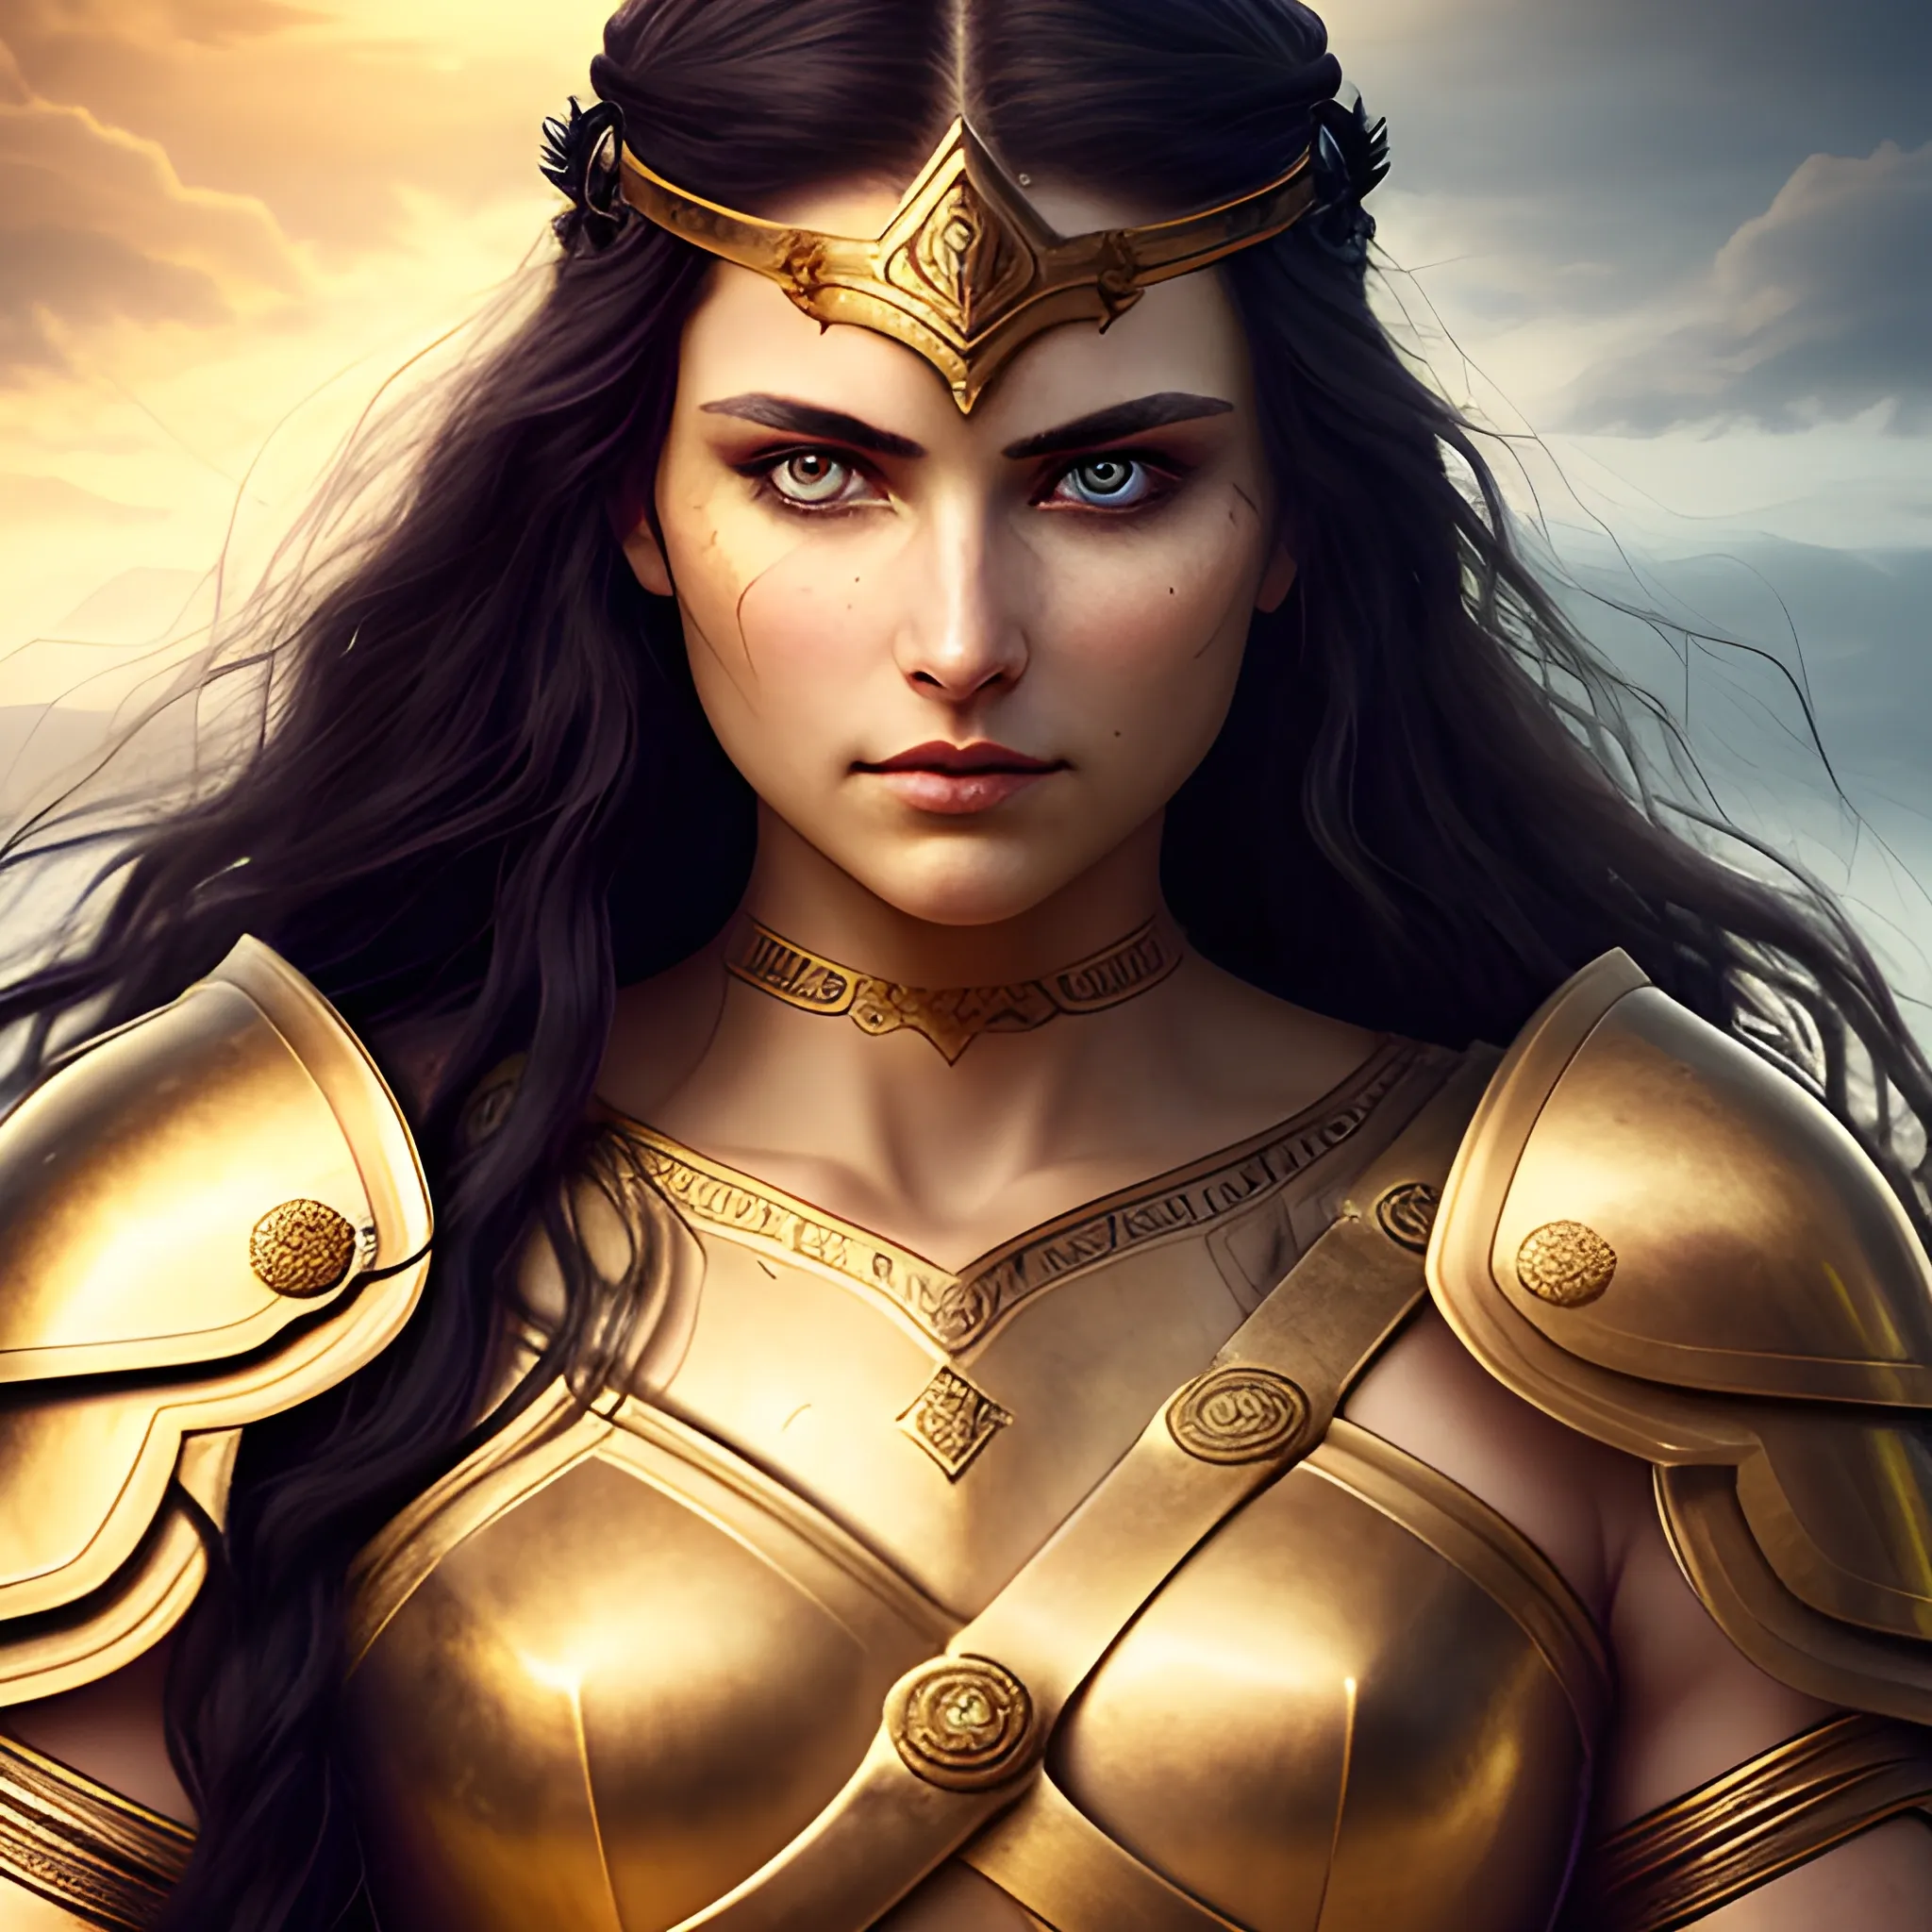 "She was a warrior goddess with astonishing beauty. Her eyes were the color of the sea, and her dark hair cascaded to her shoulders. Clad in golden armor and a gleaming sword in hand, she radiated a strength and bravery that left everyone all out of breath.